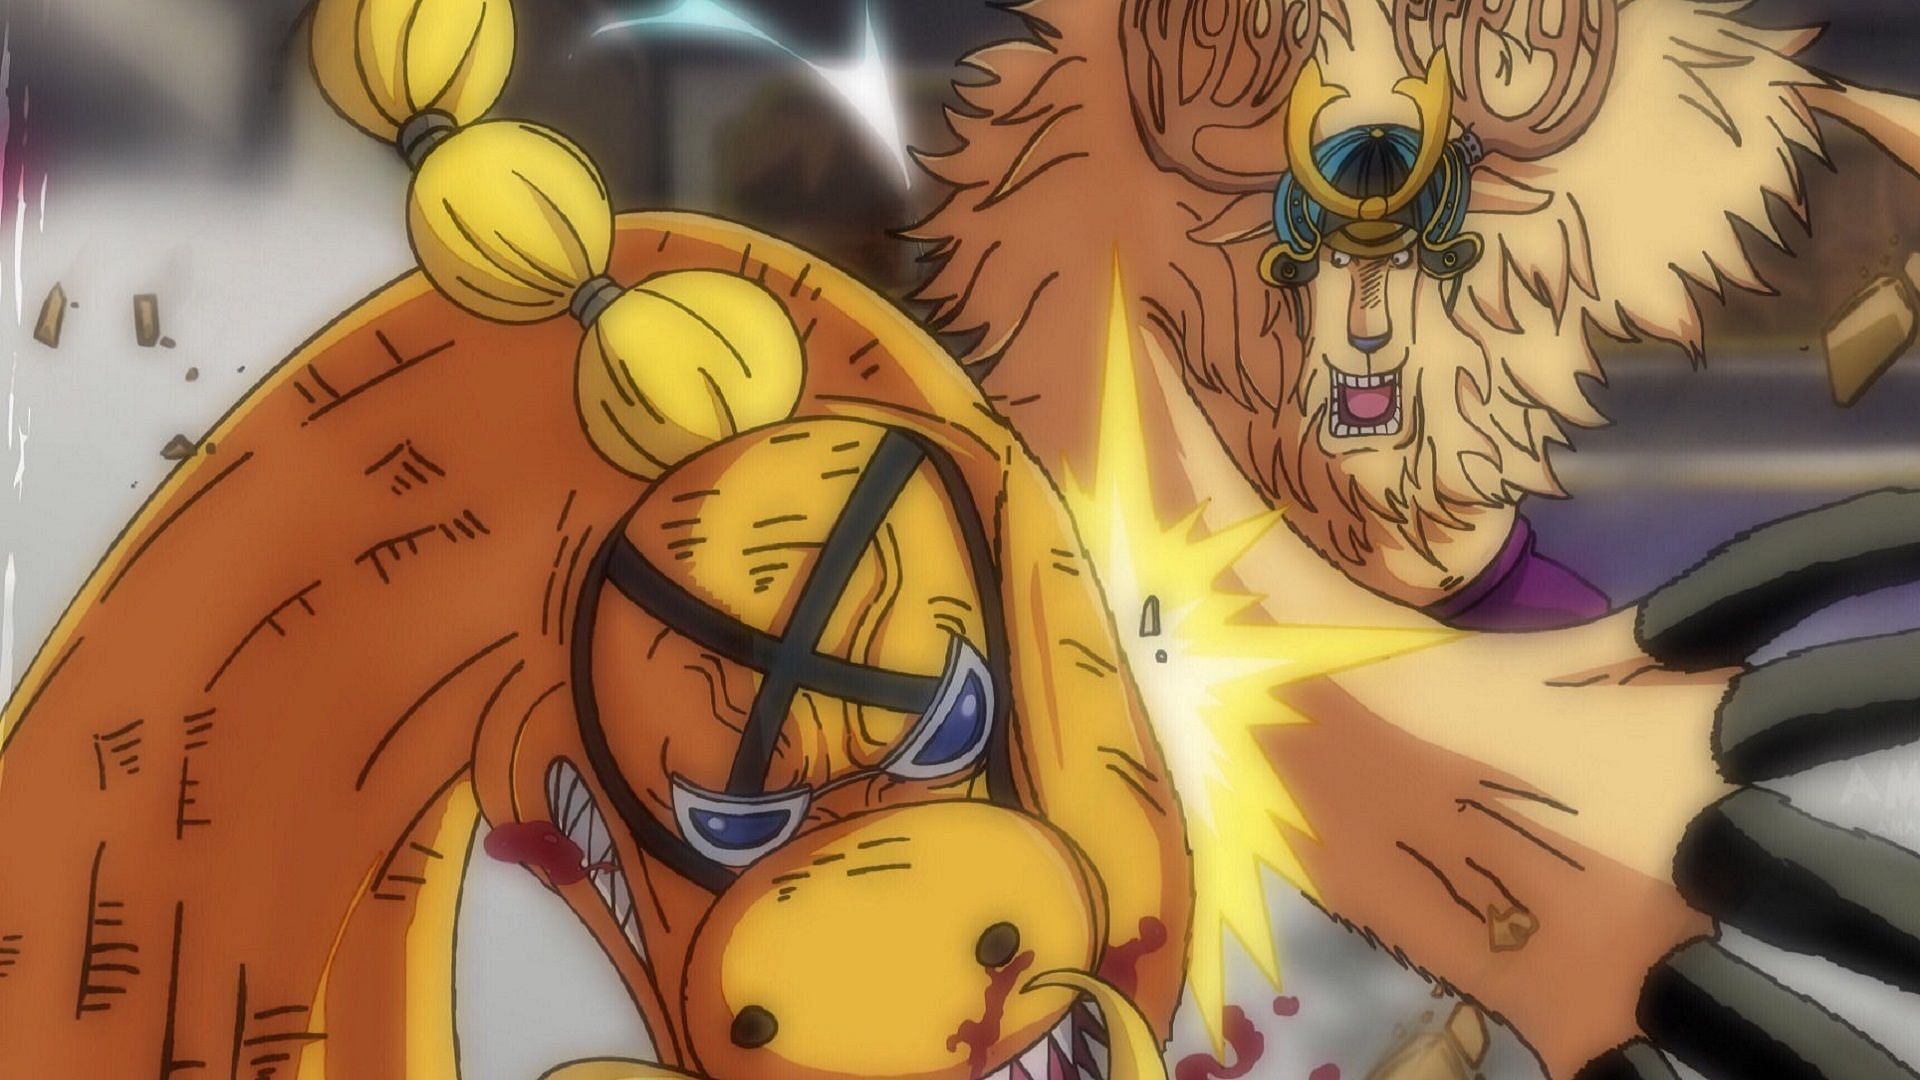 10 One Piece characters who failed expectations